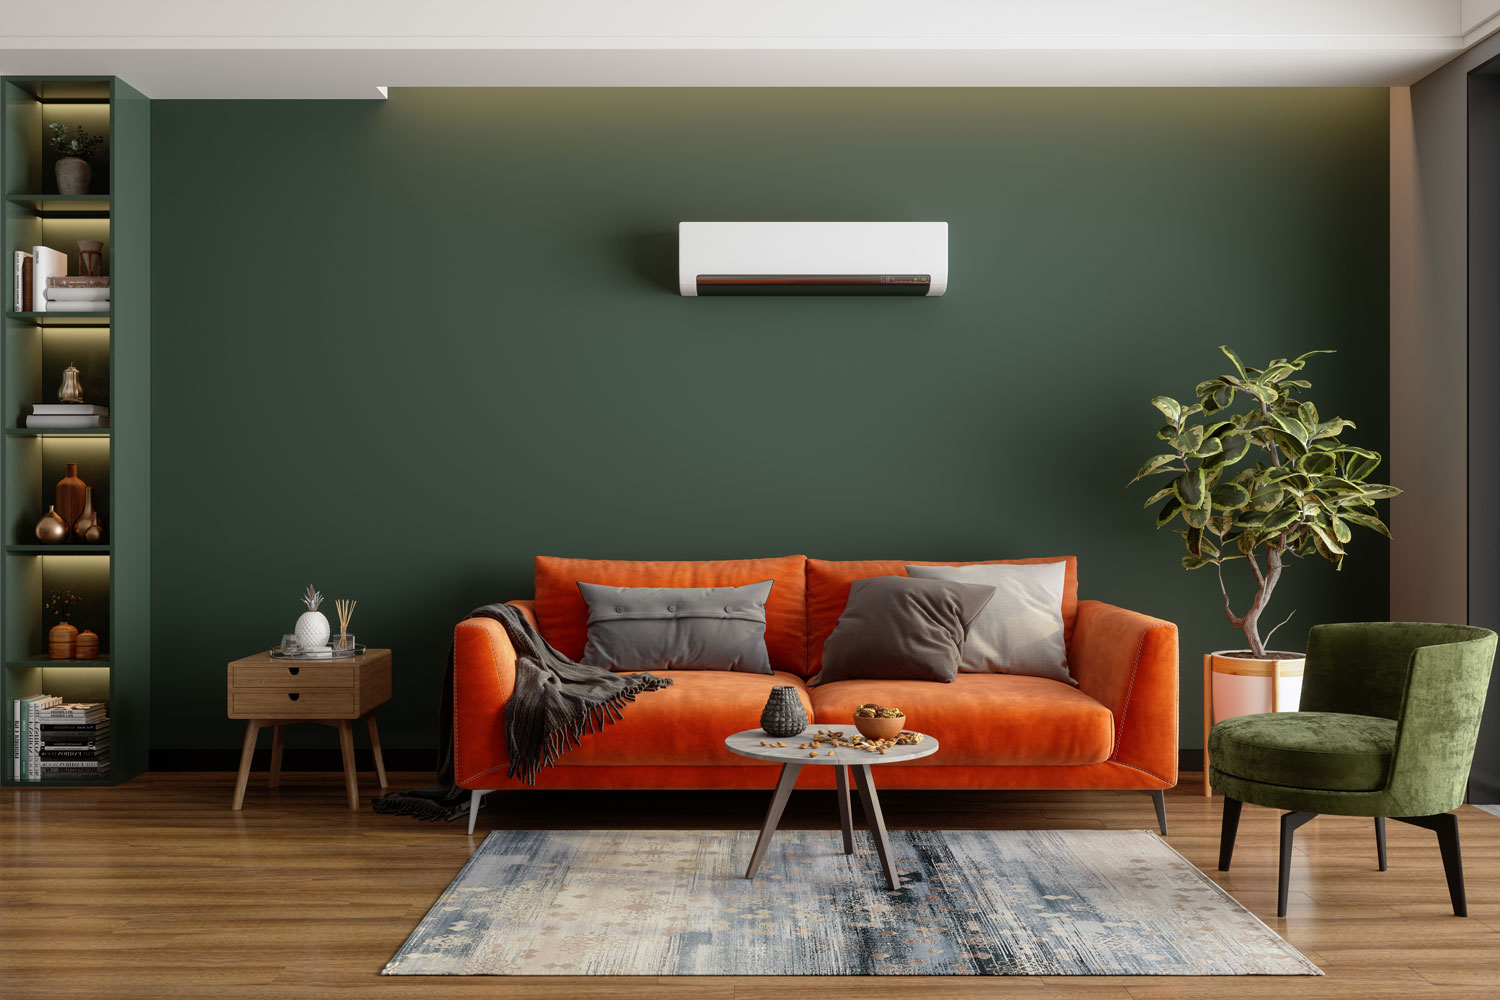 A green living area incoporated with an orange sofa, wooden flooring and a mini split air conditioning unit